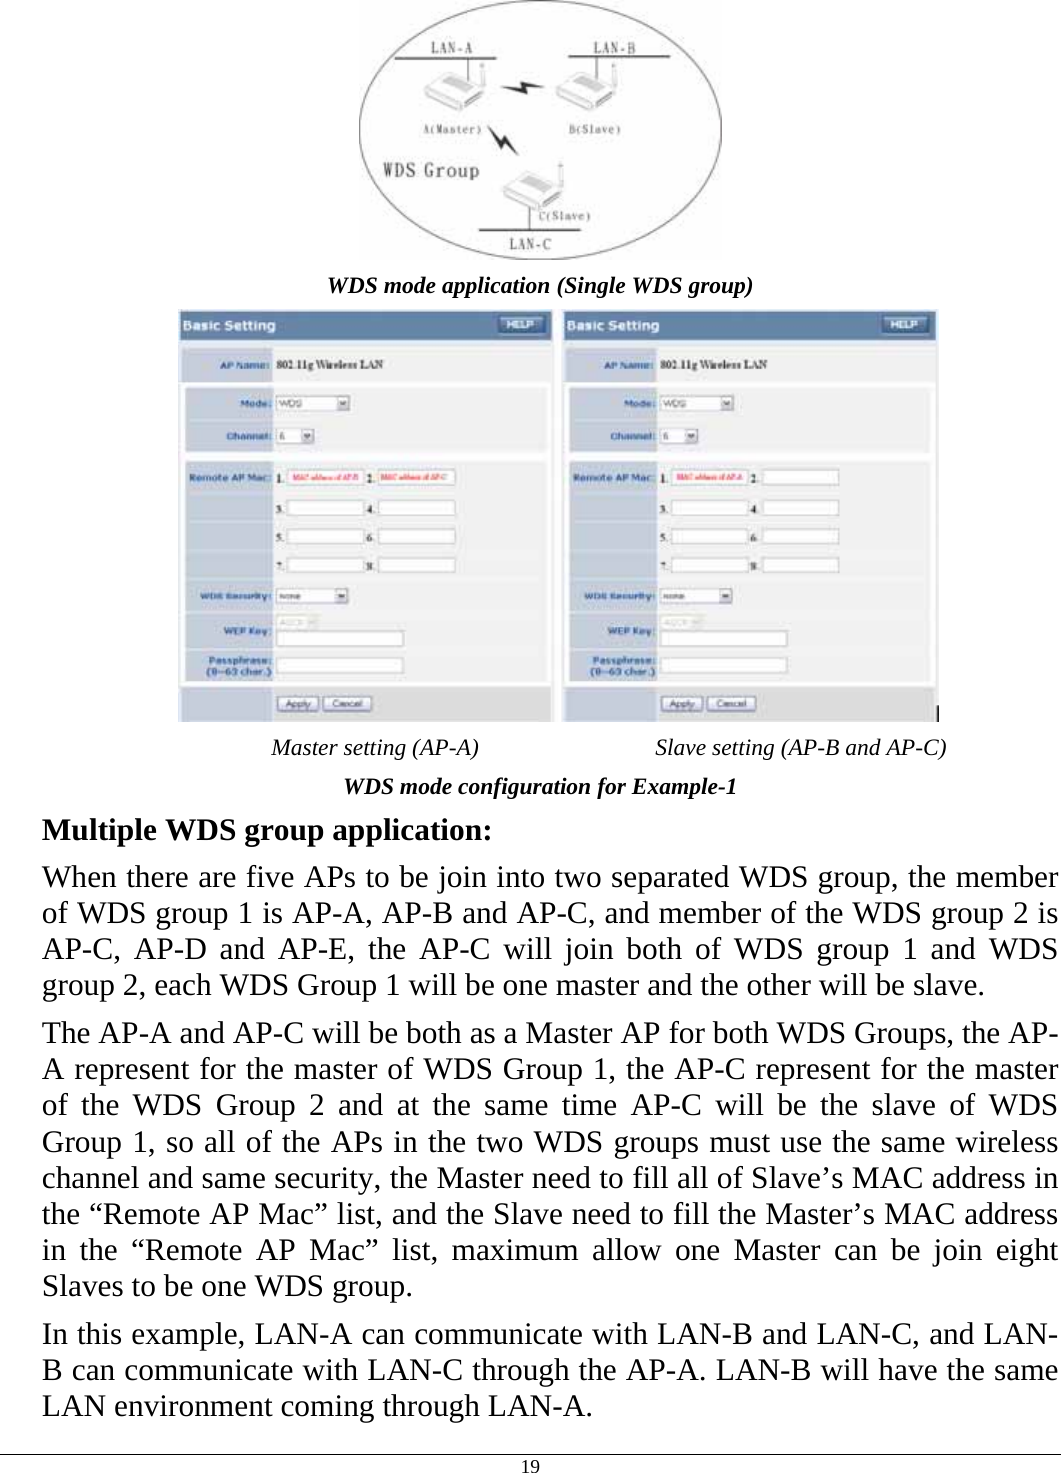  19  WDS mode application (Single WDS group)      Master setting (AP-A)                              Slave setting (AP-B and AP-C) WDS mode configuration for Example-1 Multiple WDS group application: When there are five APs to be join into two separated WDS group, the member of WDS group 1 is AP-A, AP-B and AP-C, and member of the WDS group 2 is AP-C, AP-D and AP-E, the AP-C will join both of WDS group 1 and WDS group 2, each WDS Group 1 will be one master and the other will be slave. The AP-A and AP-C will be both as a Master AP for both WDS Groups, the AP-A represent for the master of WDS Group 1, the AP-C represent for the master of the WDS Group 2 and at the same time AP-C will be the slave of WDS Group 1, so all of the APs in the two WDS groups must use the same wireless channel and same security, the Master need to fill all of Slave’s MAC address in the “Remote AP Mac” list, and the Slave need to fill the Master’s MAC address in the “Remote AP Mac” list, maximum allow one Master can be join eight Slaves to be one WDS group. In this example, LAN-A can communicate with LAN-B and LAN-C, and LAN-B can communicate with LAN-C through the AP-A. LAN-B will have the same LAN environment coming through LAN-A. 